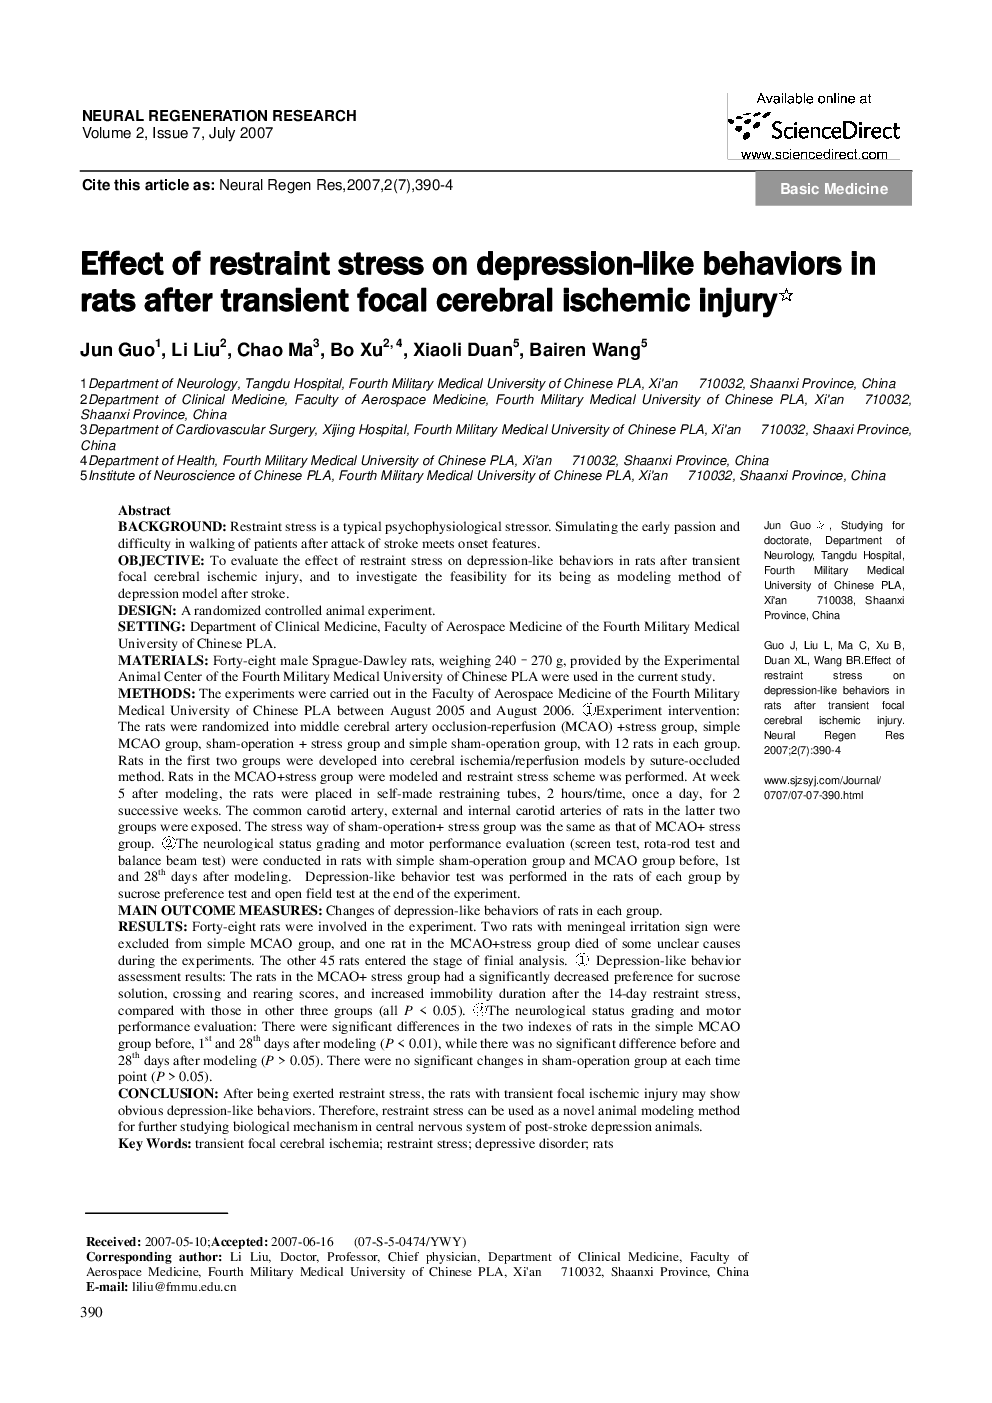 Effect of restraint stress on depression-like behaviors in rats after transient focal cerebral ischemic injury